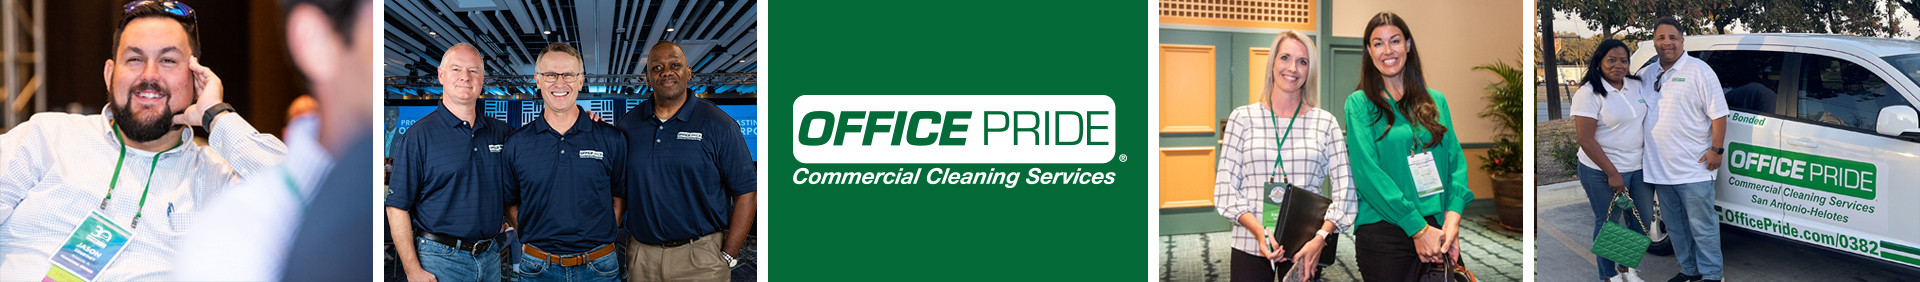 Office Pride provides aspiring entrepreneurs with an obtainable, scalable business rooted in faith-based culture. Explore the Office Pride Franchise Opportunity.